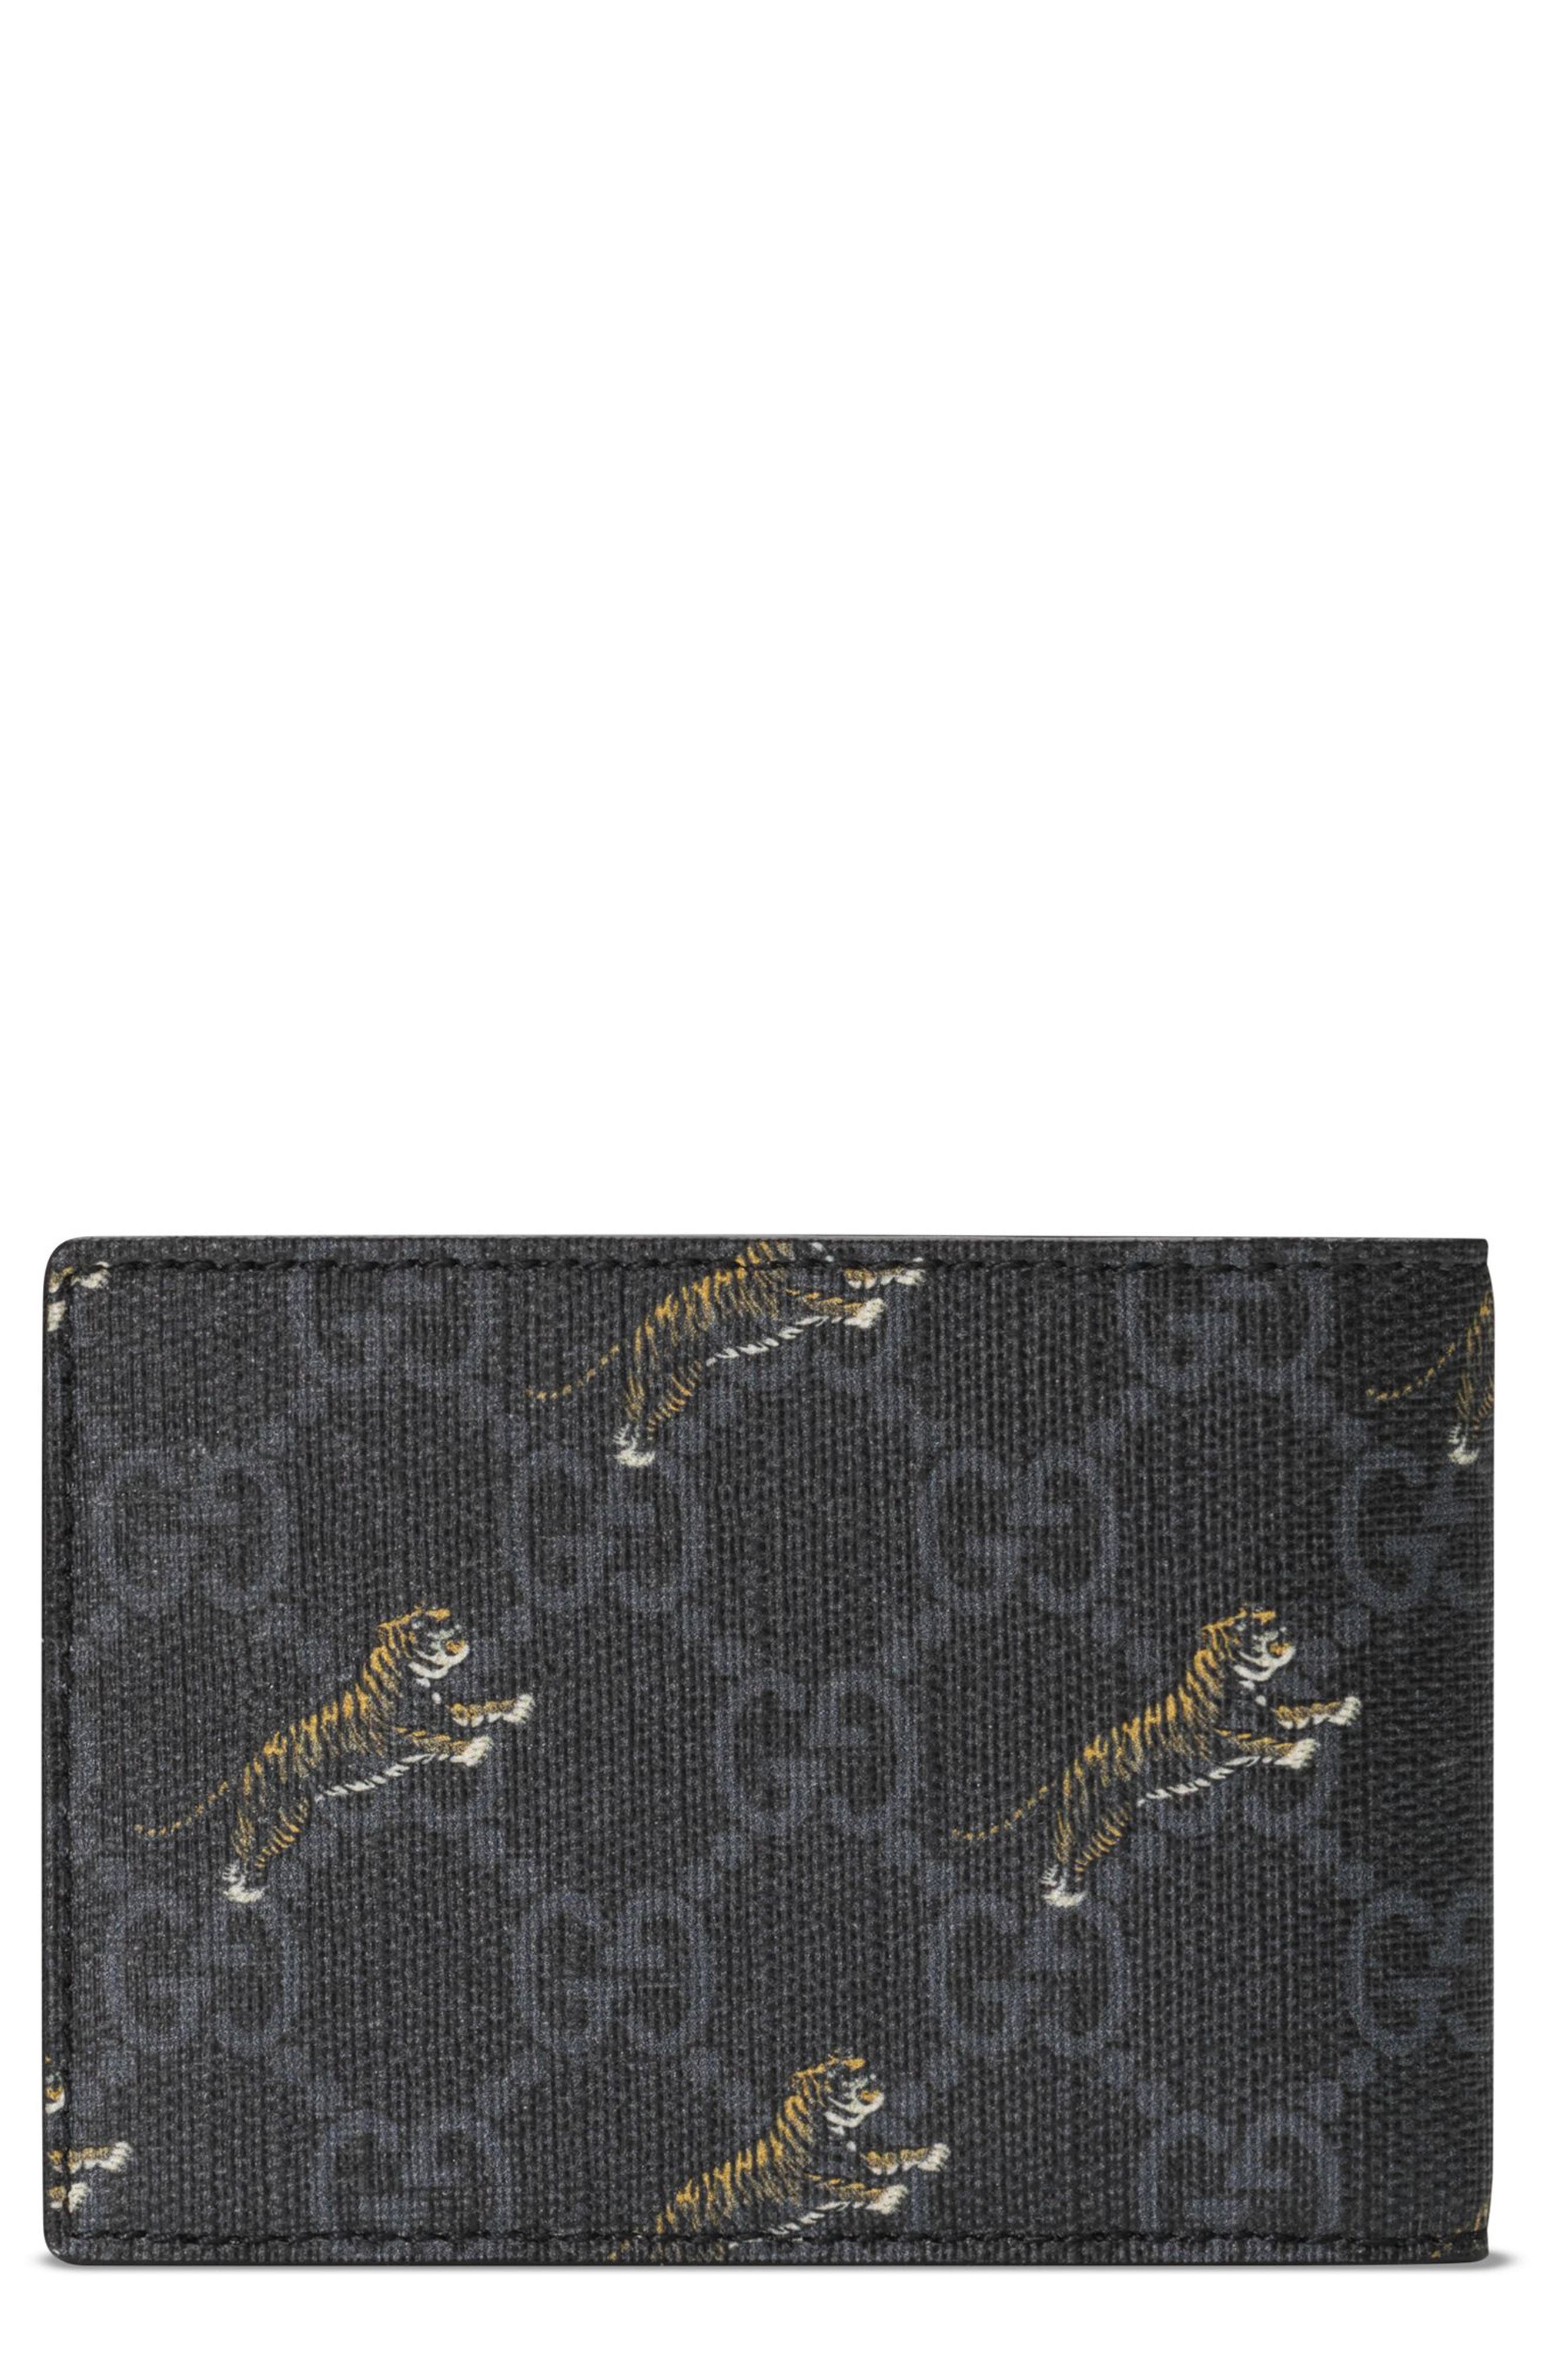 gucci mens wallet clearance